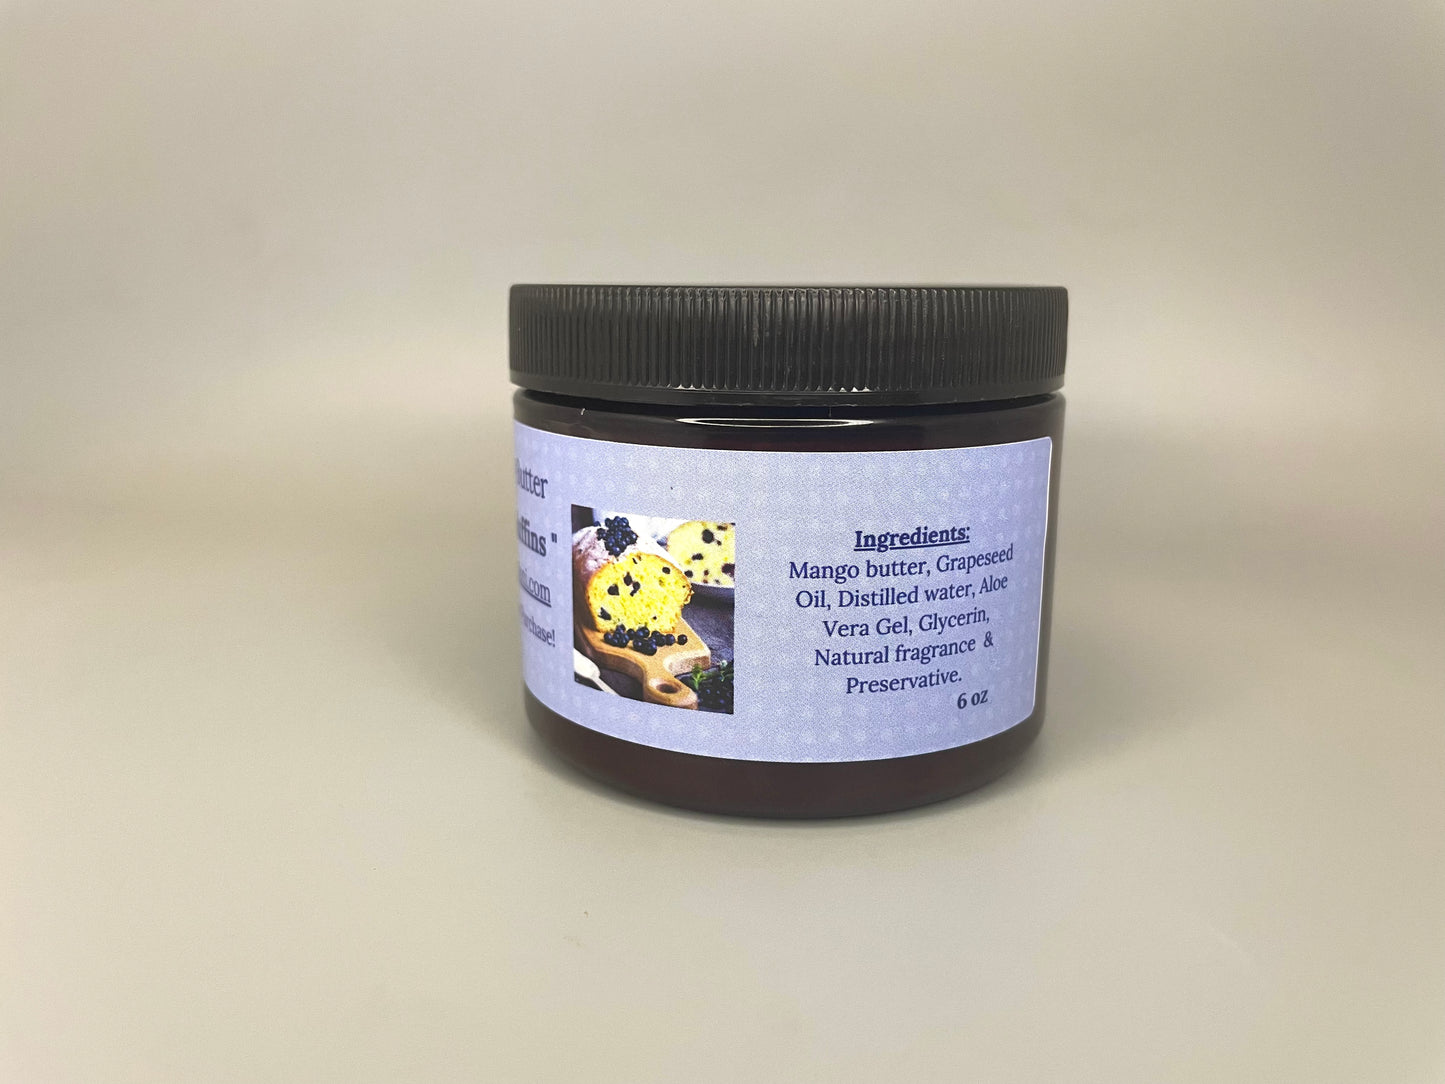 Blueberry Muffins Body Butter